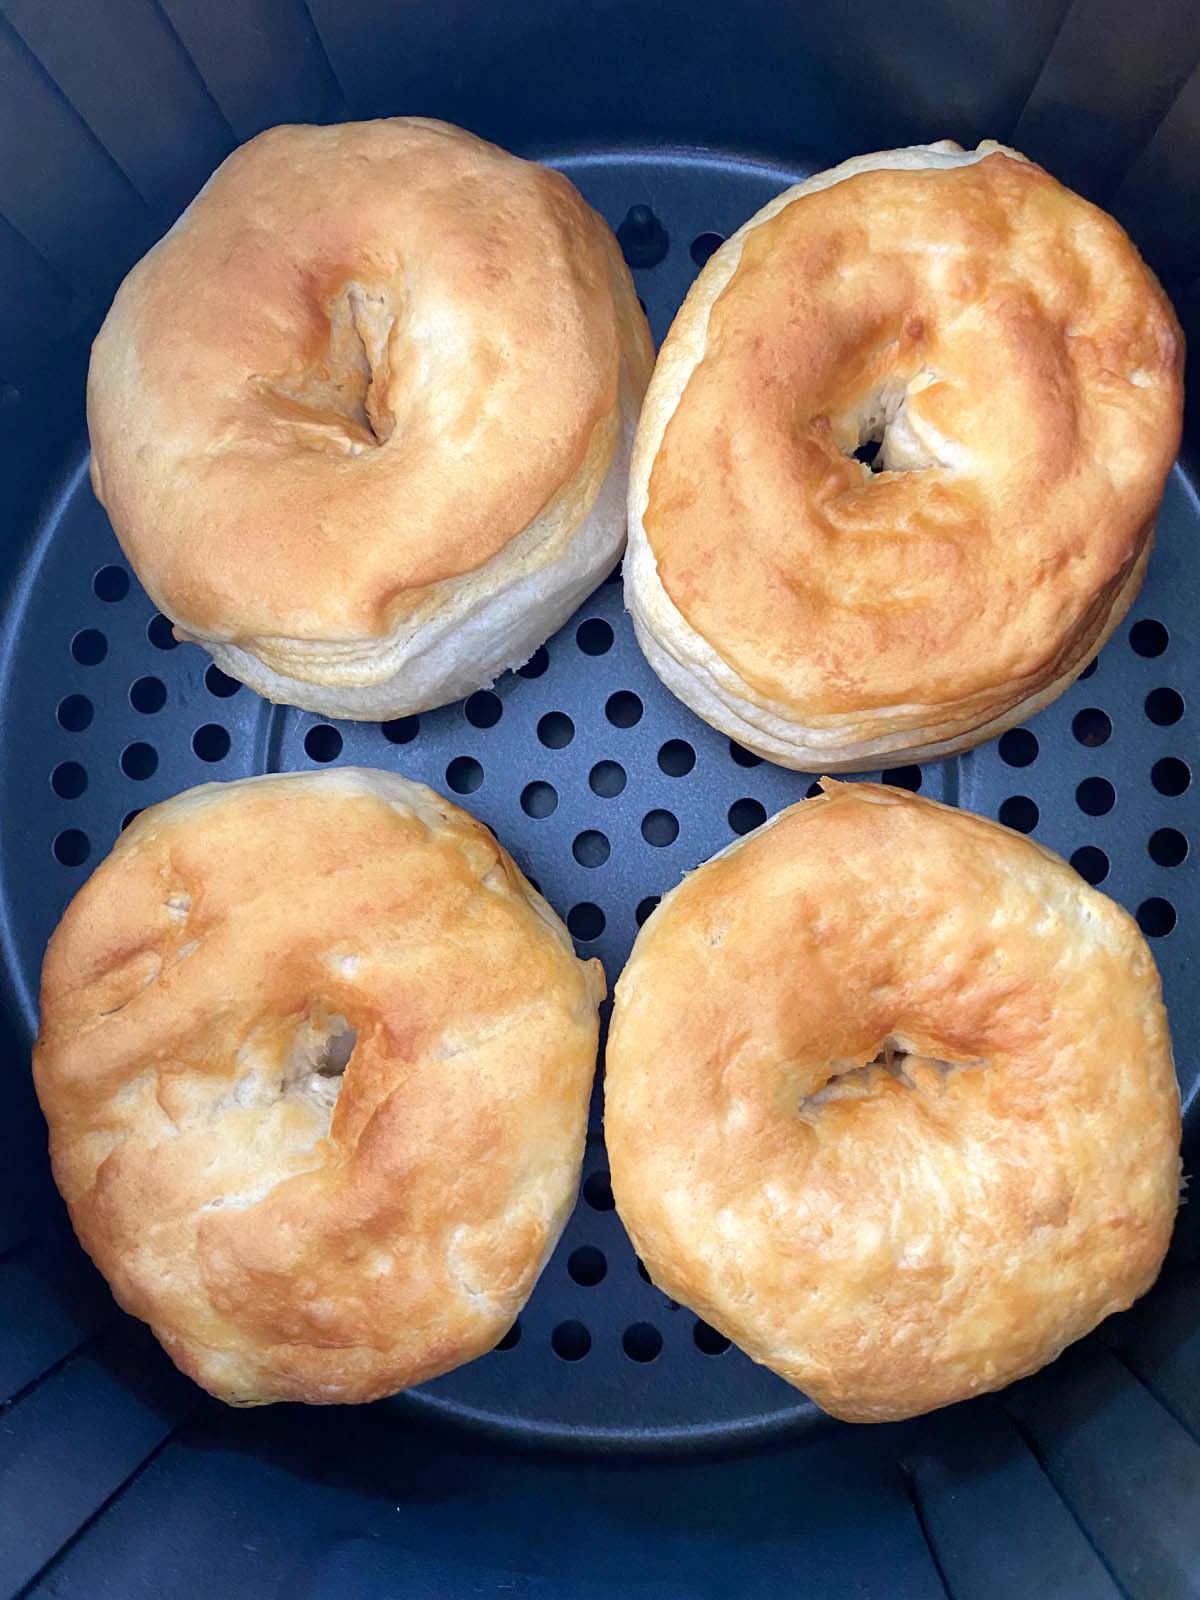 Biscuit donuts in an air fryer.